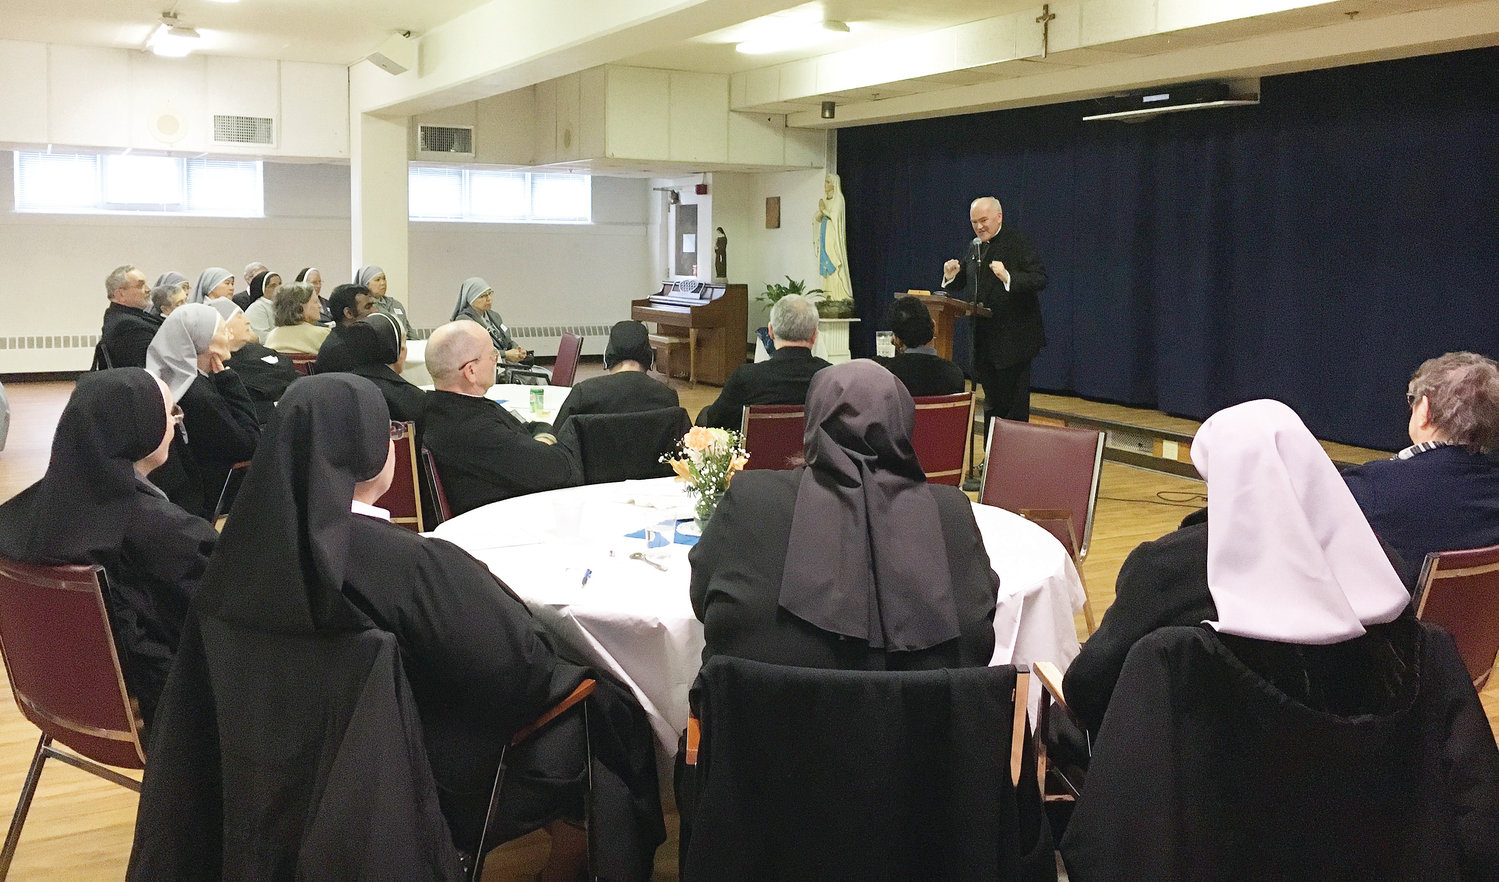 Father Joseph Gillespie, L.C., chaplain at Overbrook Academy in Greenville, offered a talk on the consecrated life.